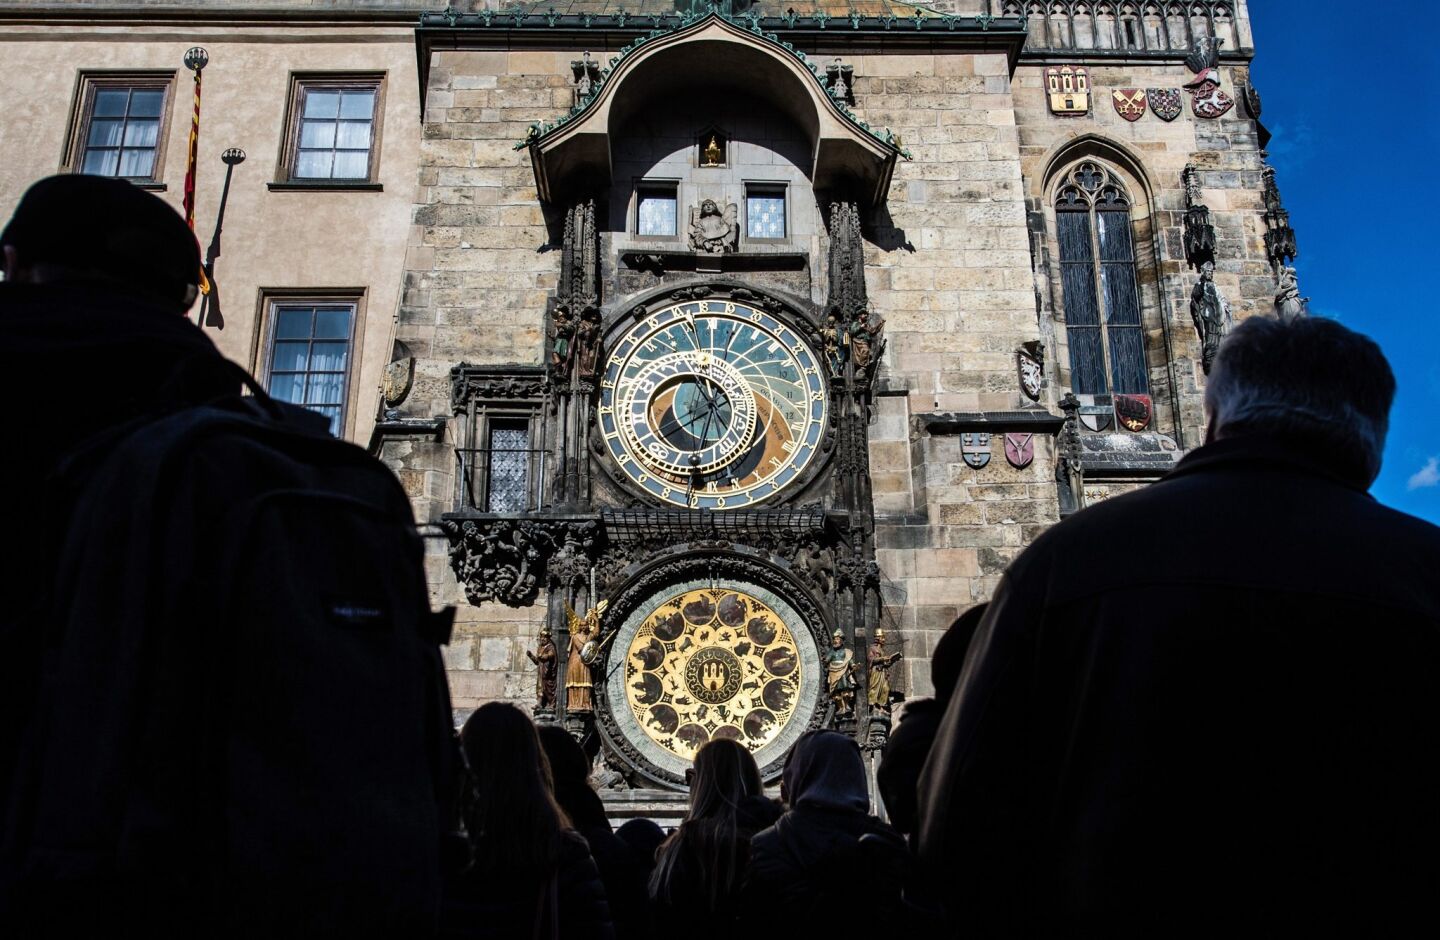 Built in 1410, the apparatus is the world's oldest functioning astronomical clock. It adorns the facade of the Old Town Hall of Prague's Old Town Square. The clock's astronomical dial tracks the motion of the sun, moon and stars. Above the dial, statues of the 12 apostles appear at the hour every hour from 9 a.m. to 9 p.m. More photos...